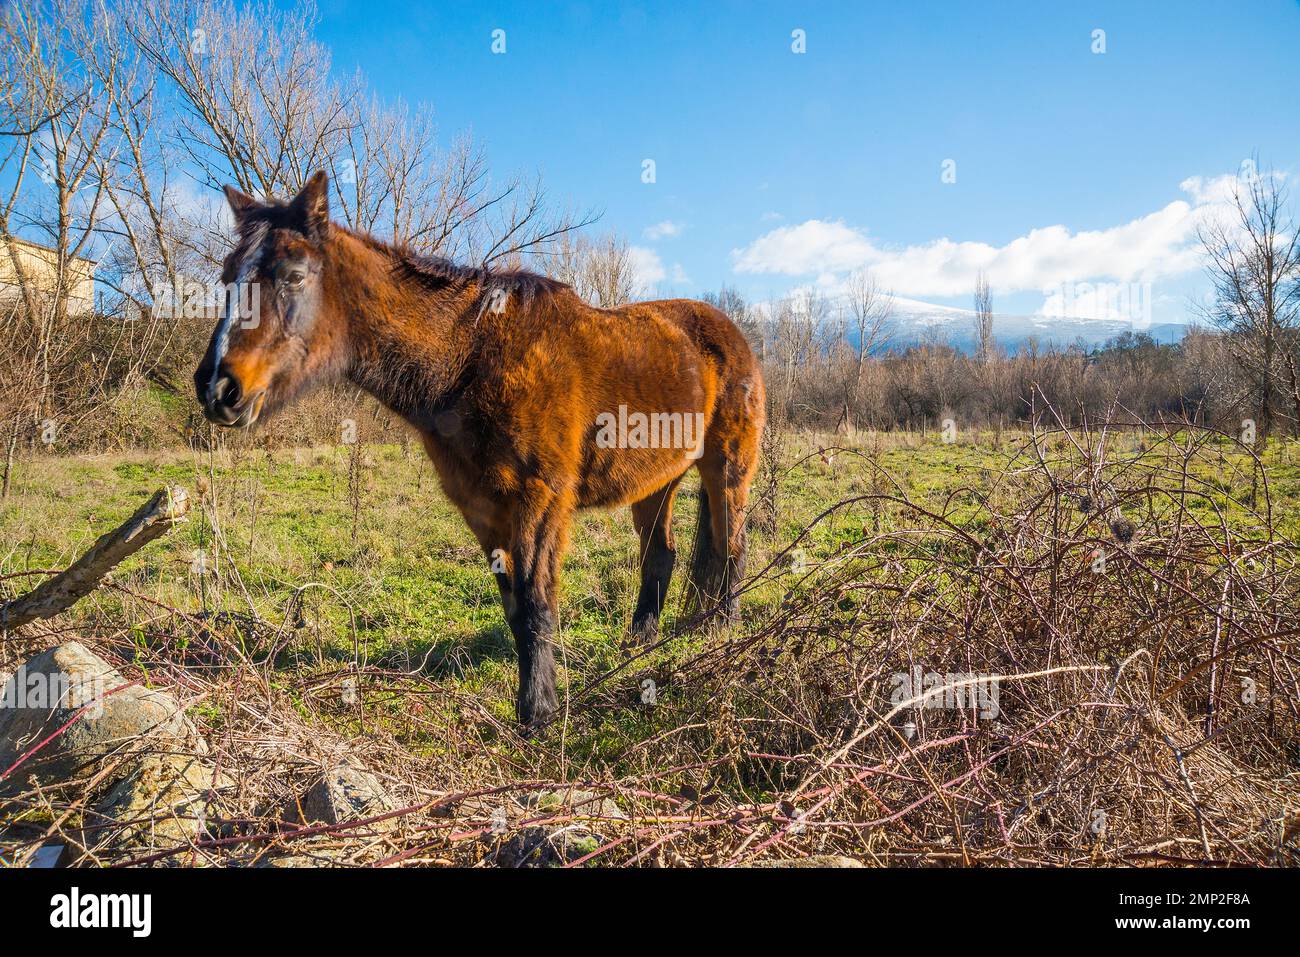 Brown horse in the countryside. Stock Photo